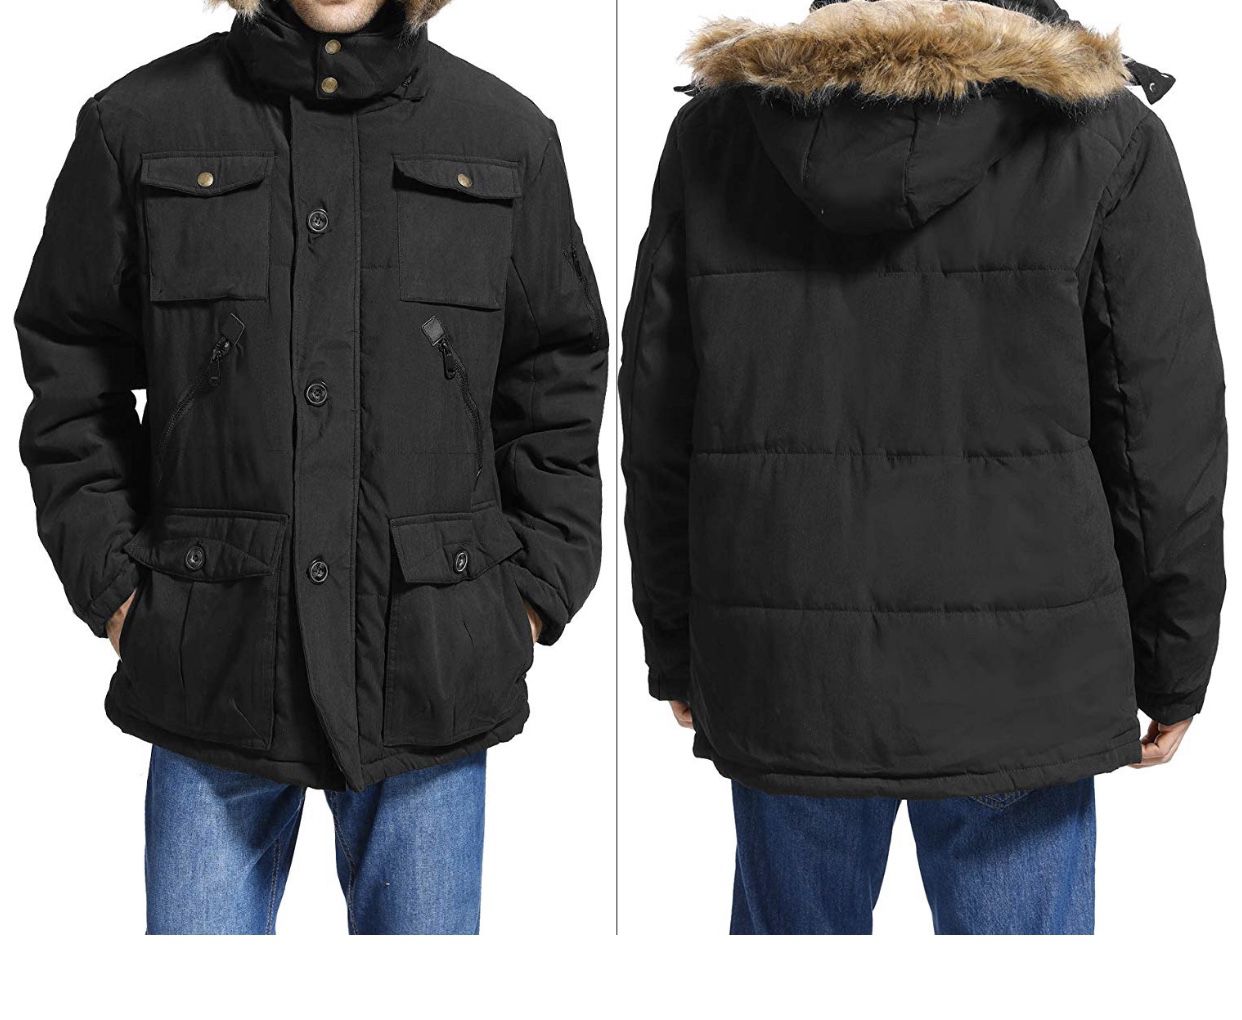 Mens Winter Parka Insulated Warm Jacket Military Coat Faux Fur with Pockets and Detachable Fur Hood